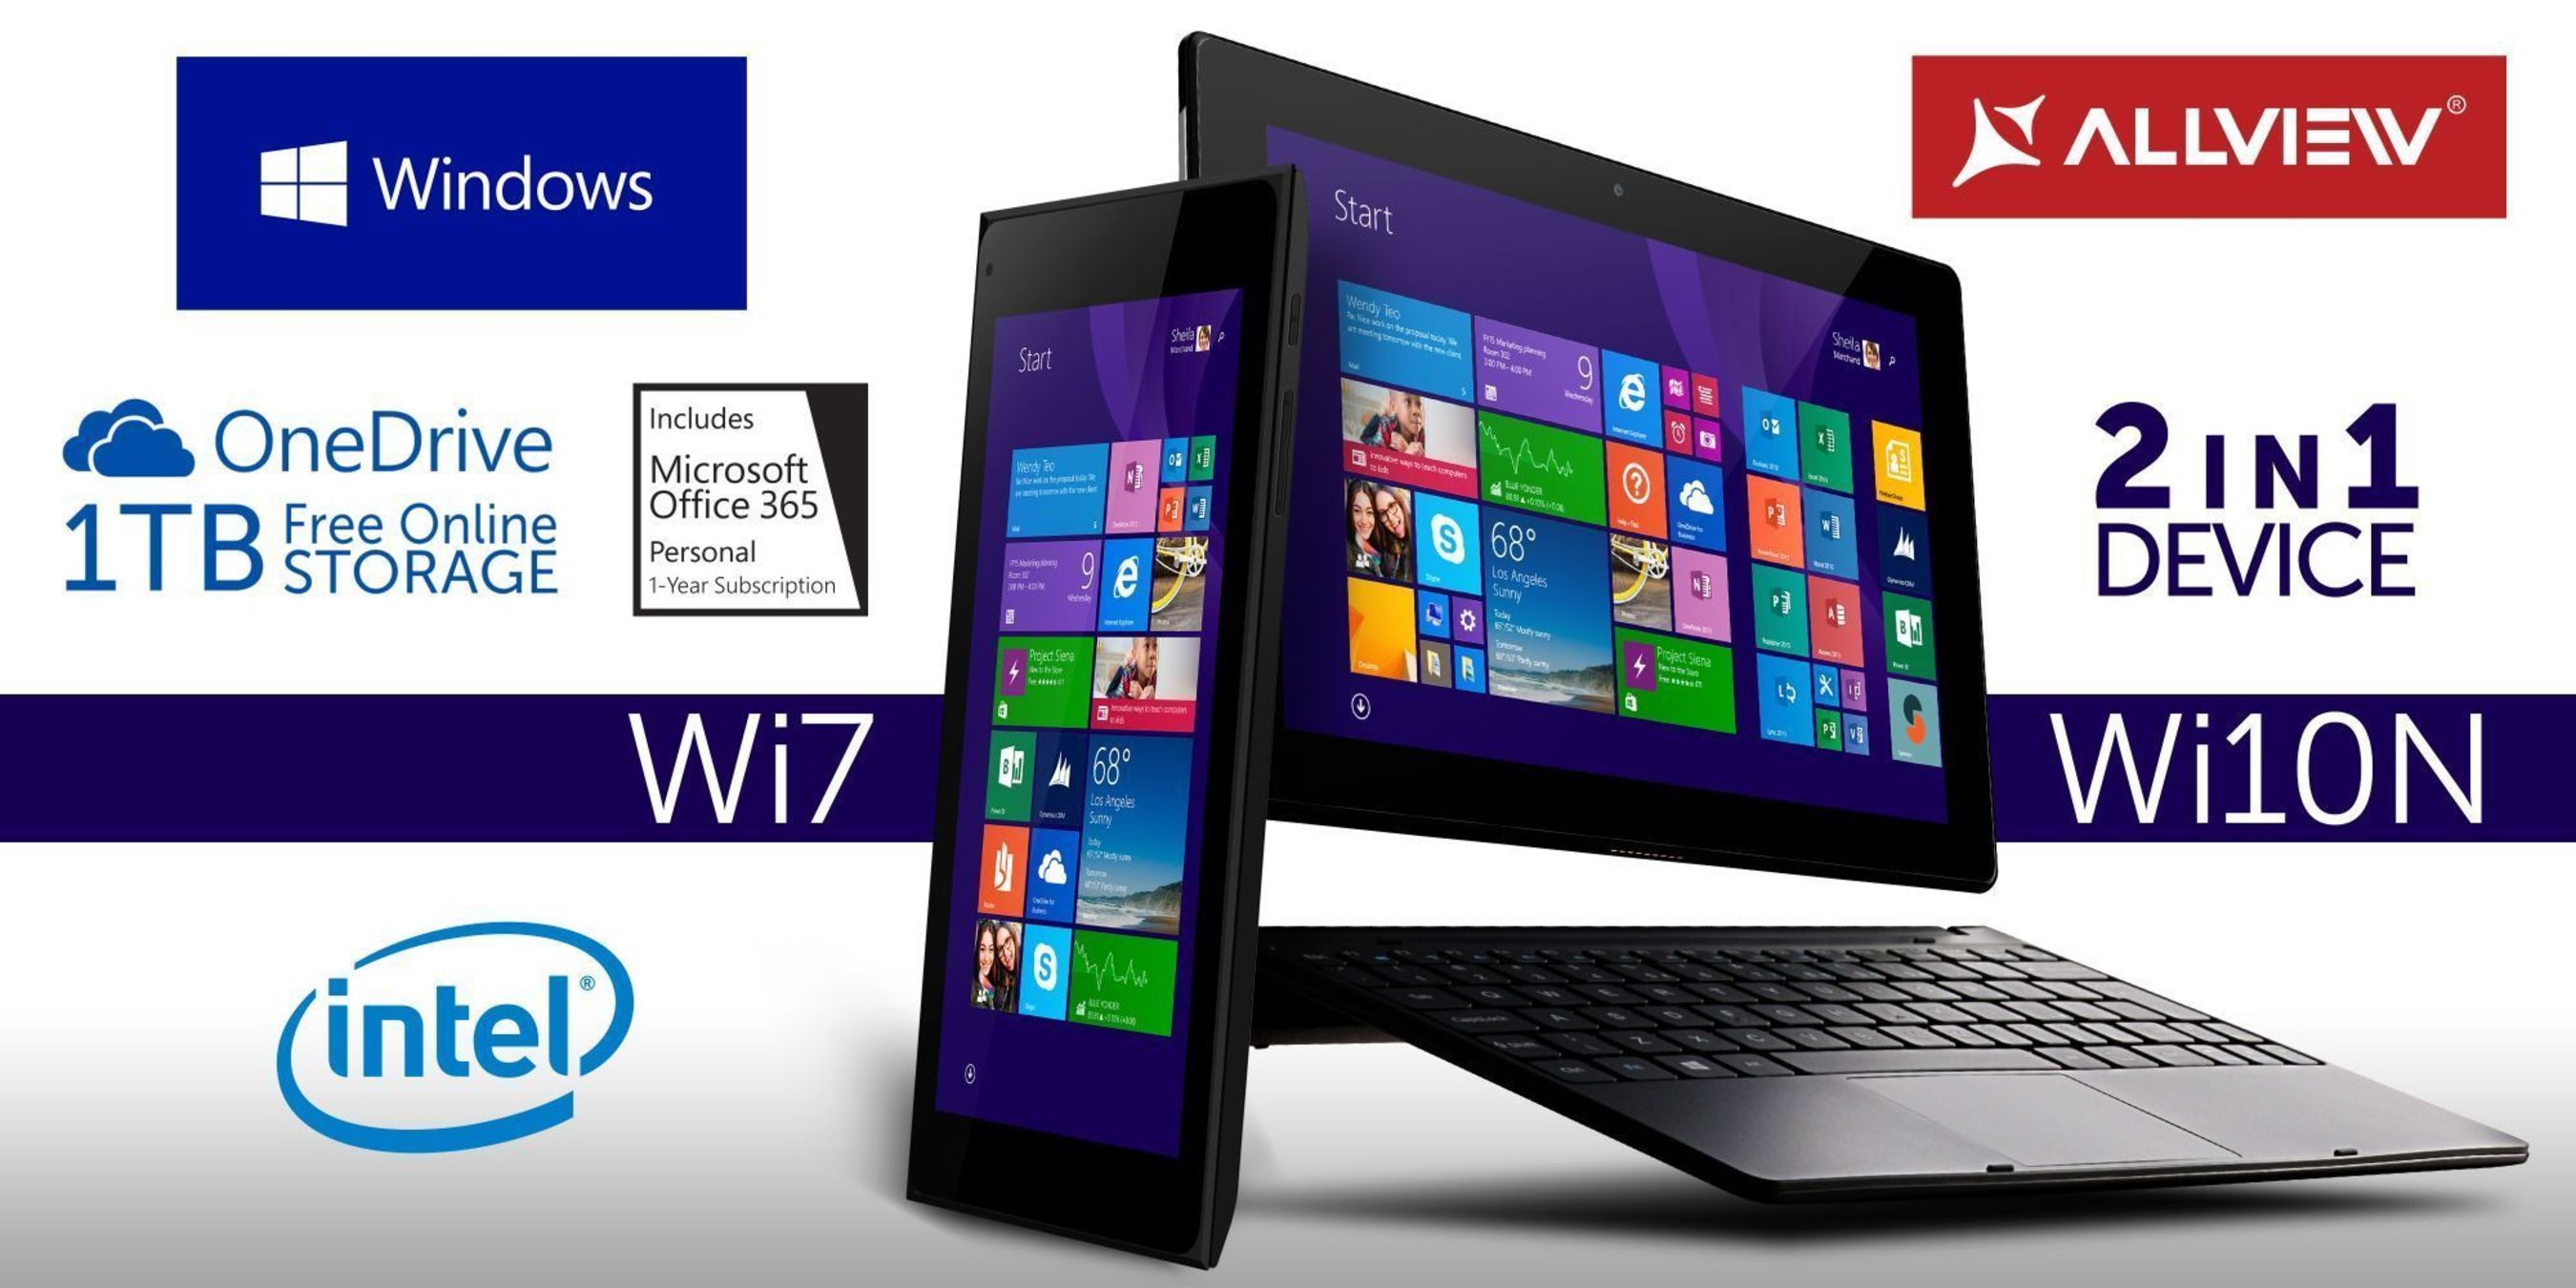 Allview WI7 and WI10N, two attractive devices with Windows 8.1 (PRNewsFoto/Allview Mobile)